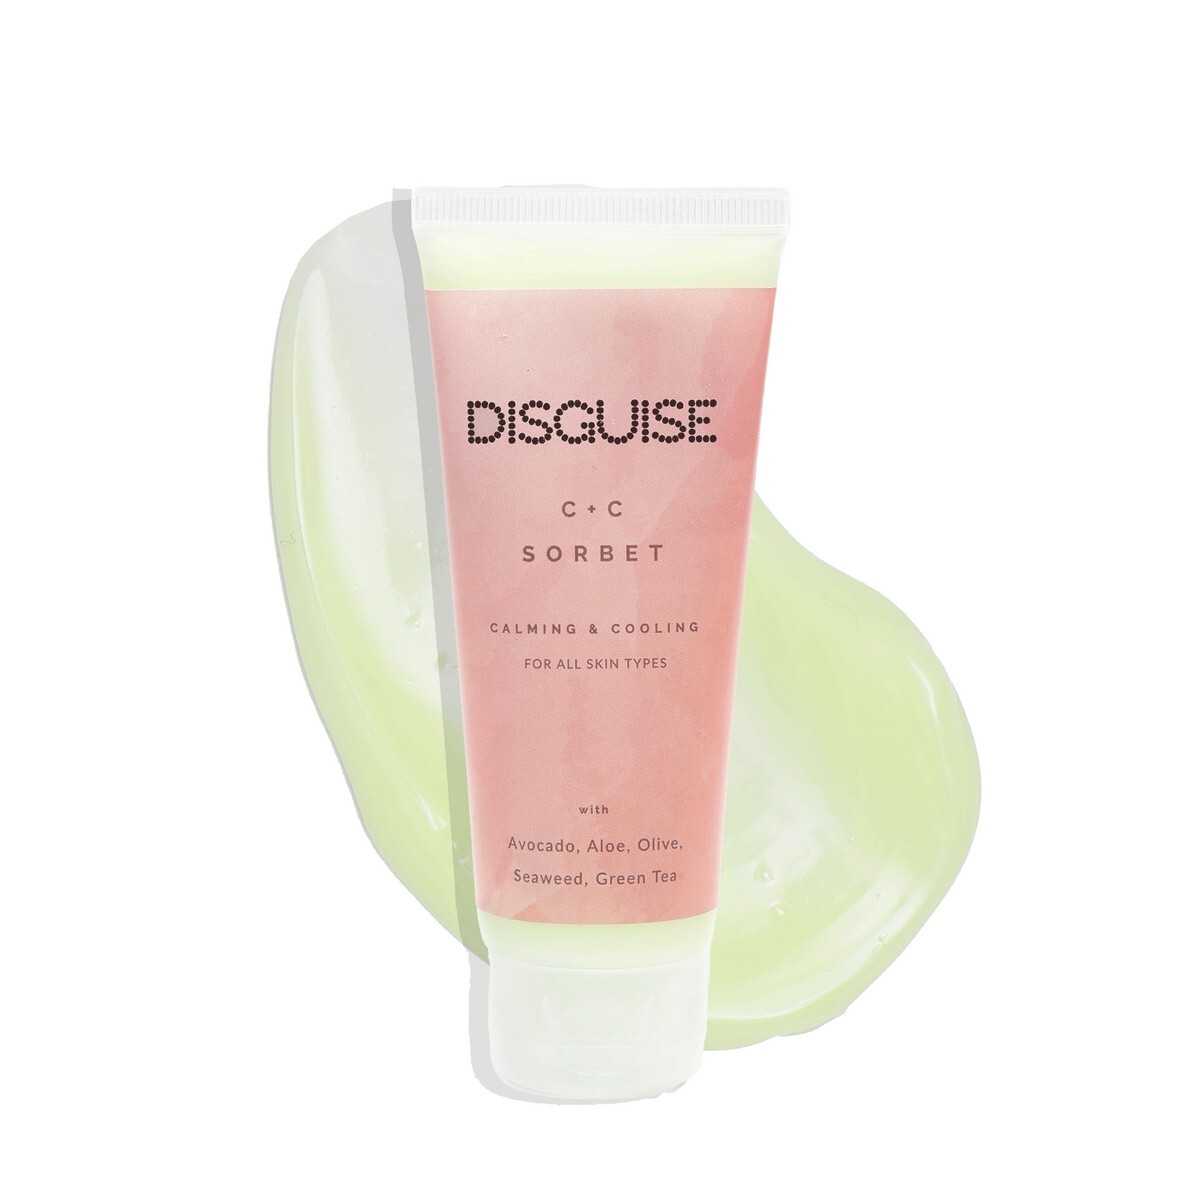 Disguise Cosmetics - C+C Sorbet Gel Moisturizer for Face - Cooling, Calming & Hydrating Moisturizer with Avocado & Vitamin E Oil for Nourished Skin - 100% Vegan & Cruelty-Free Cream for All Skin Types